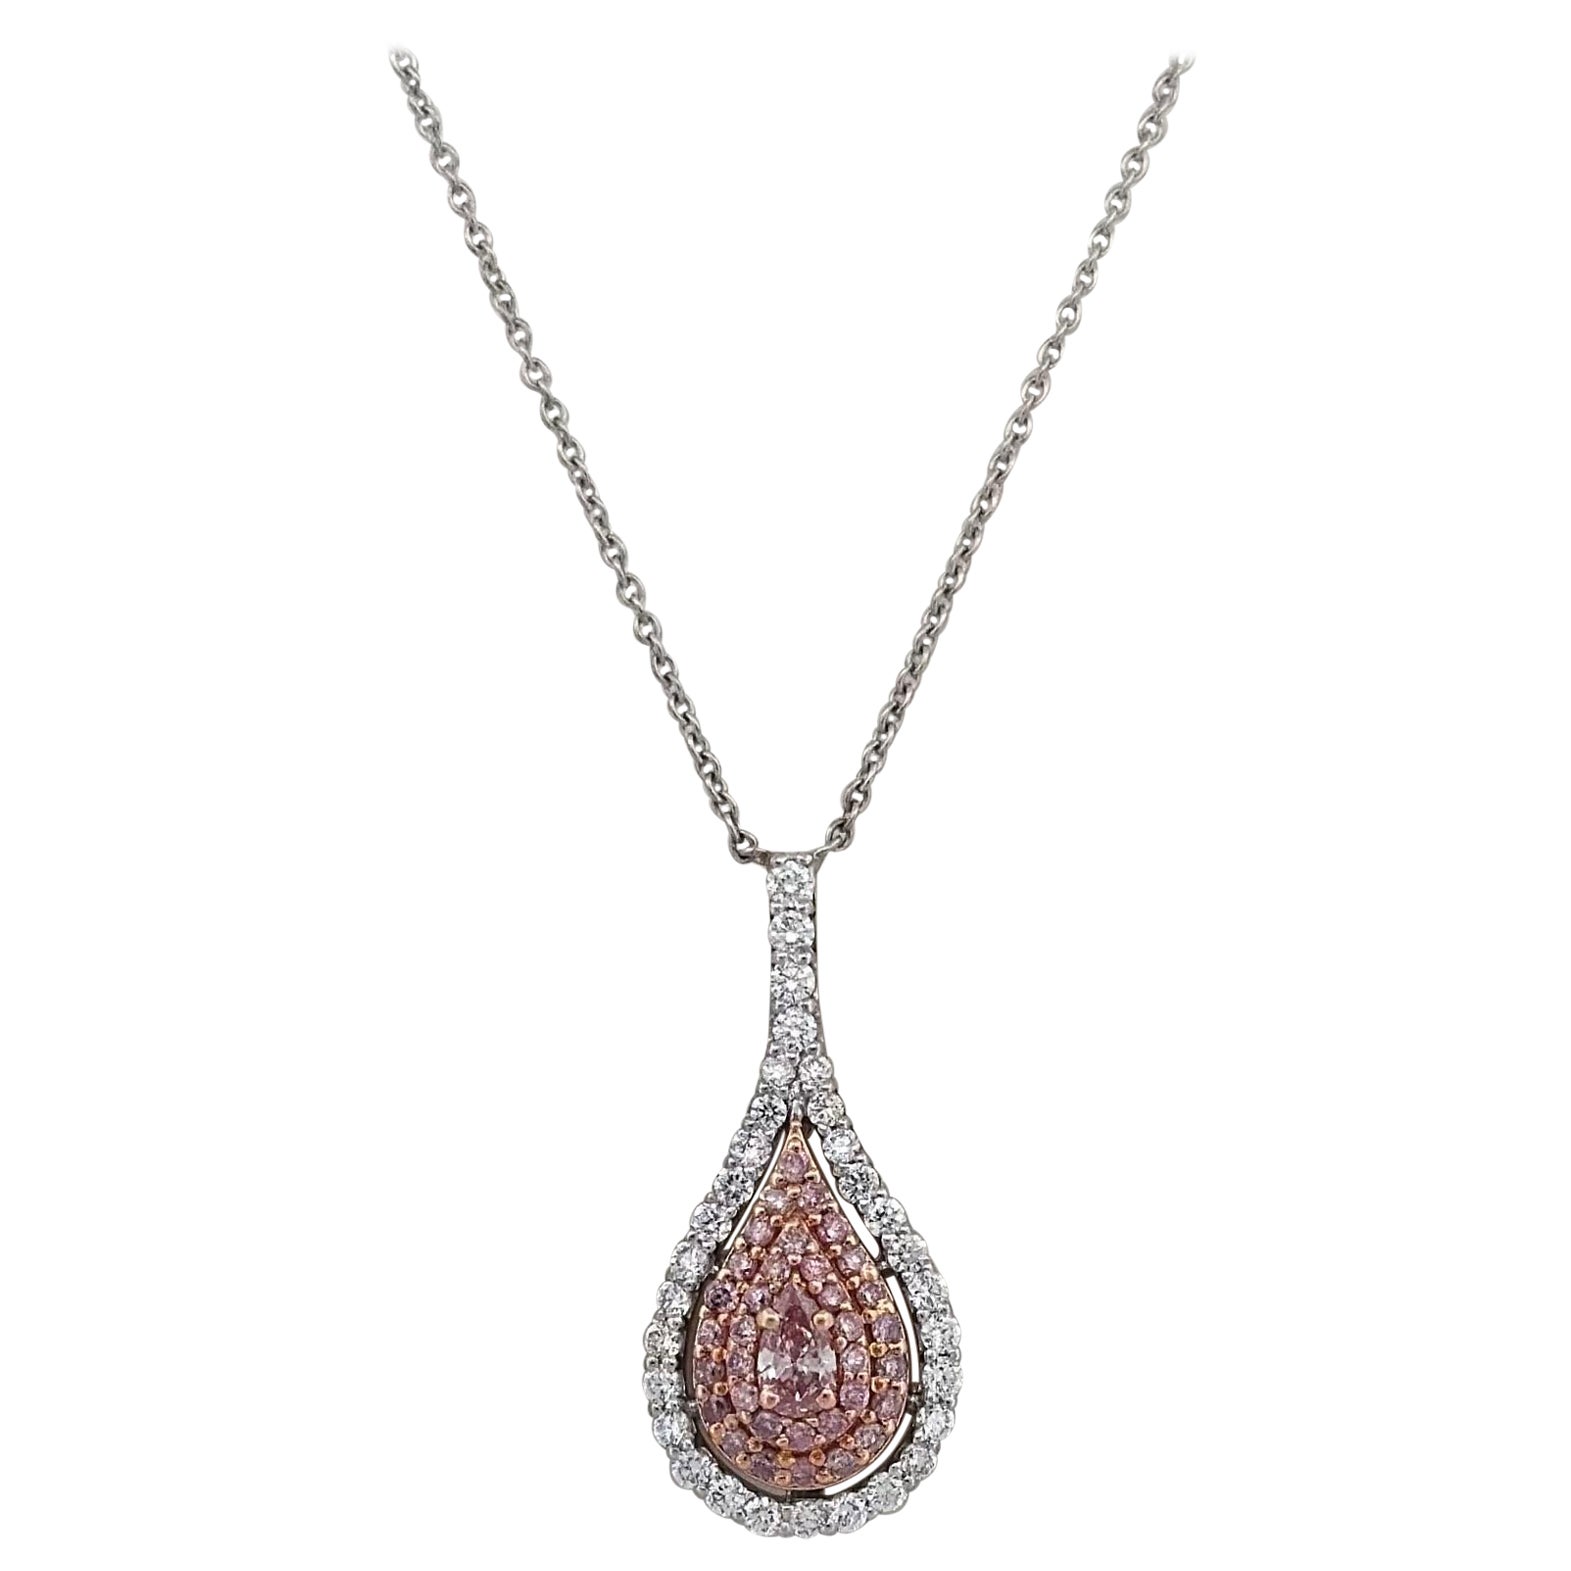 Natural Pink Pear Shape Diamond Pendant With Chain For Sale